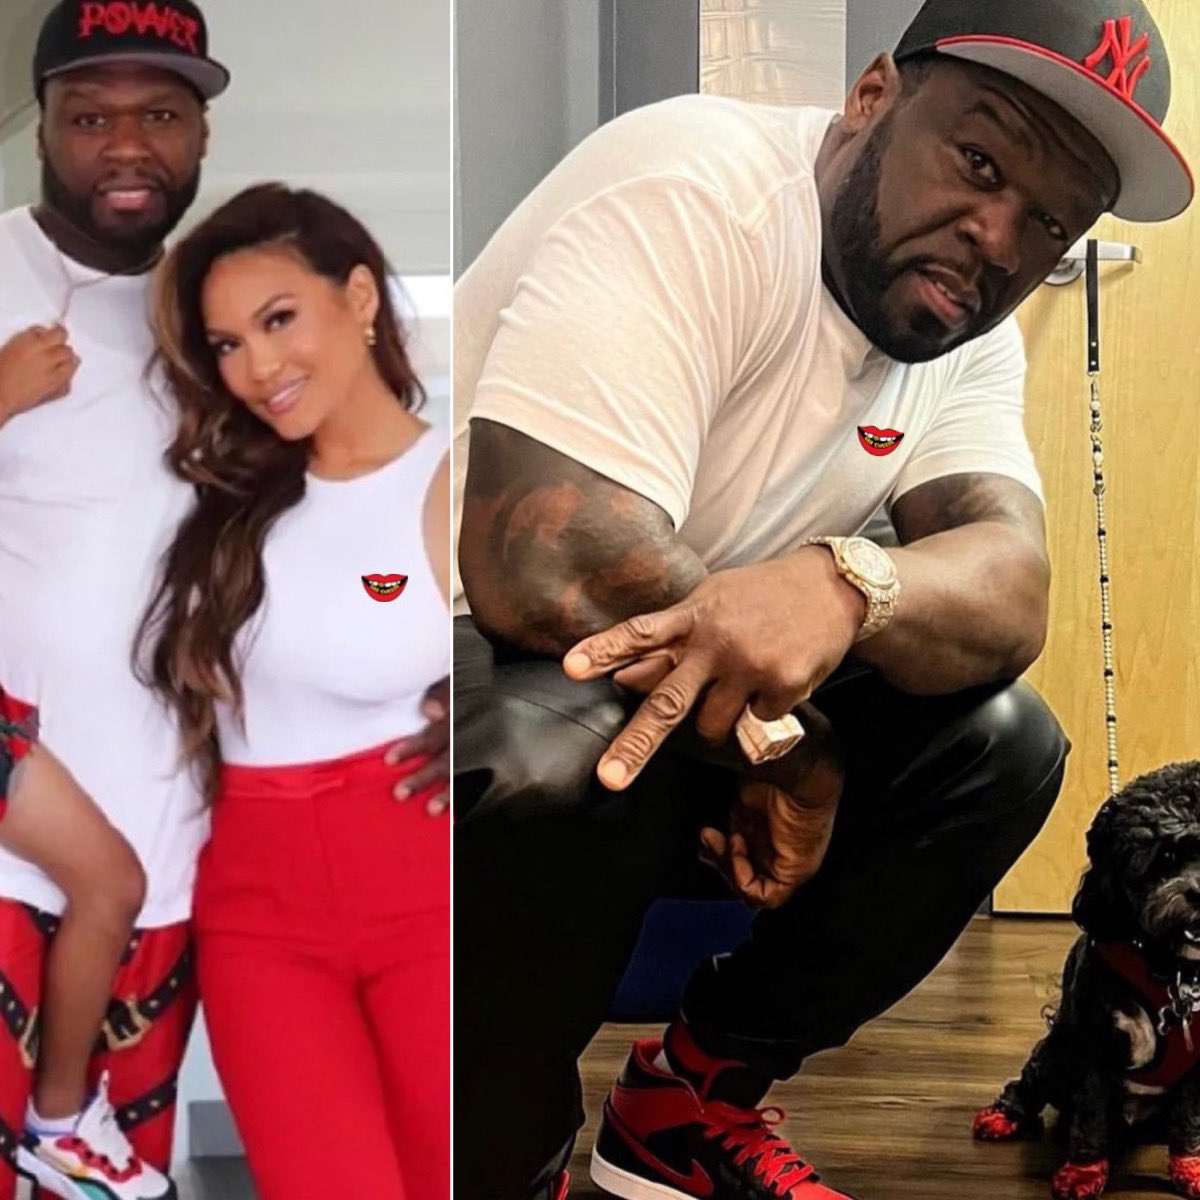 50 Cent is suing his baby mama Daphne Joy for defamation after she accused him of rape and abuse. He is seeking $1 million in damages 😳